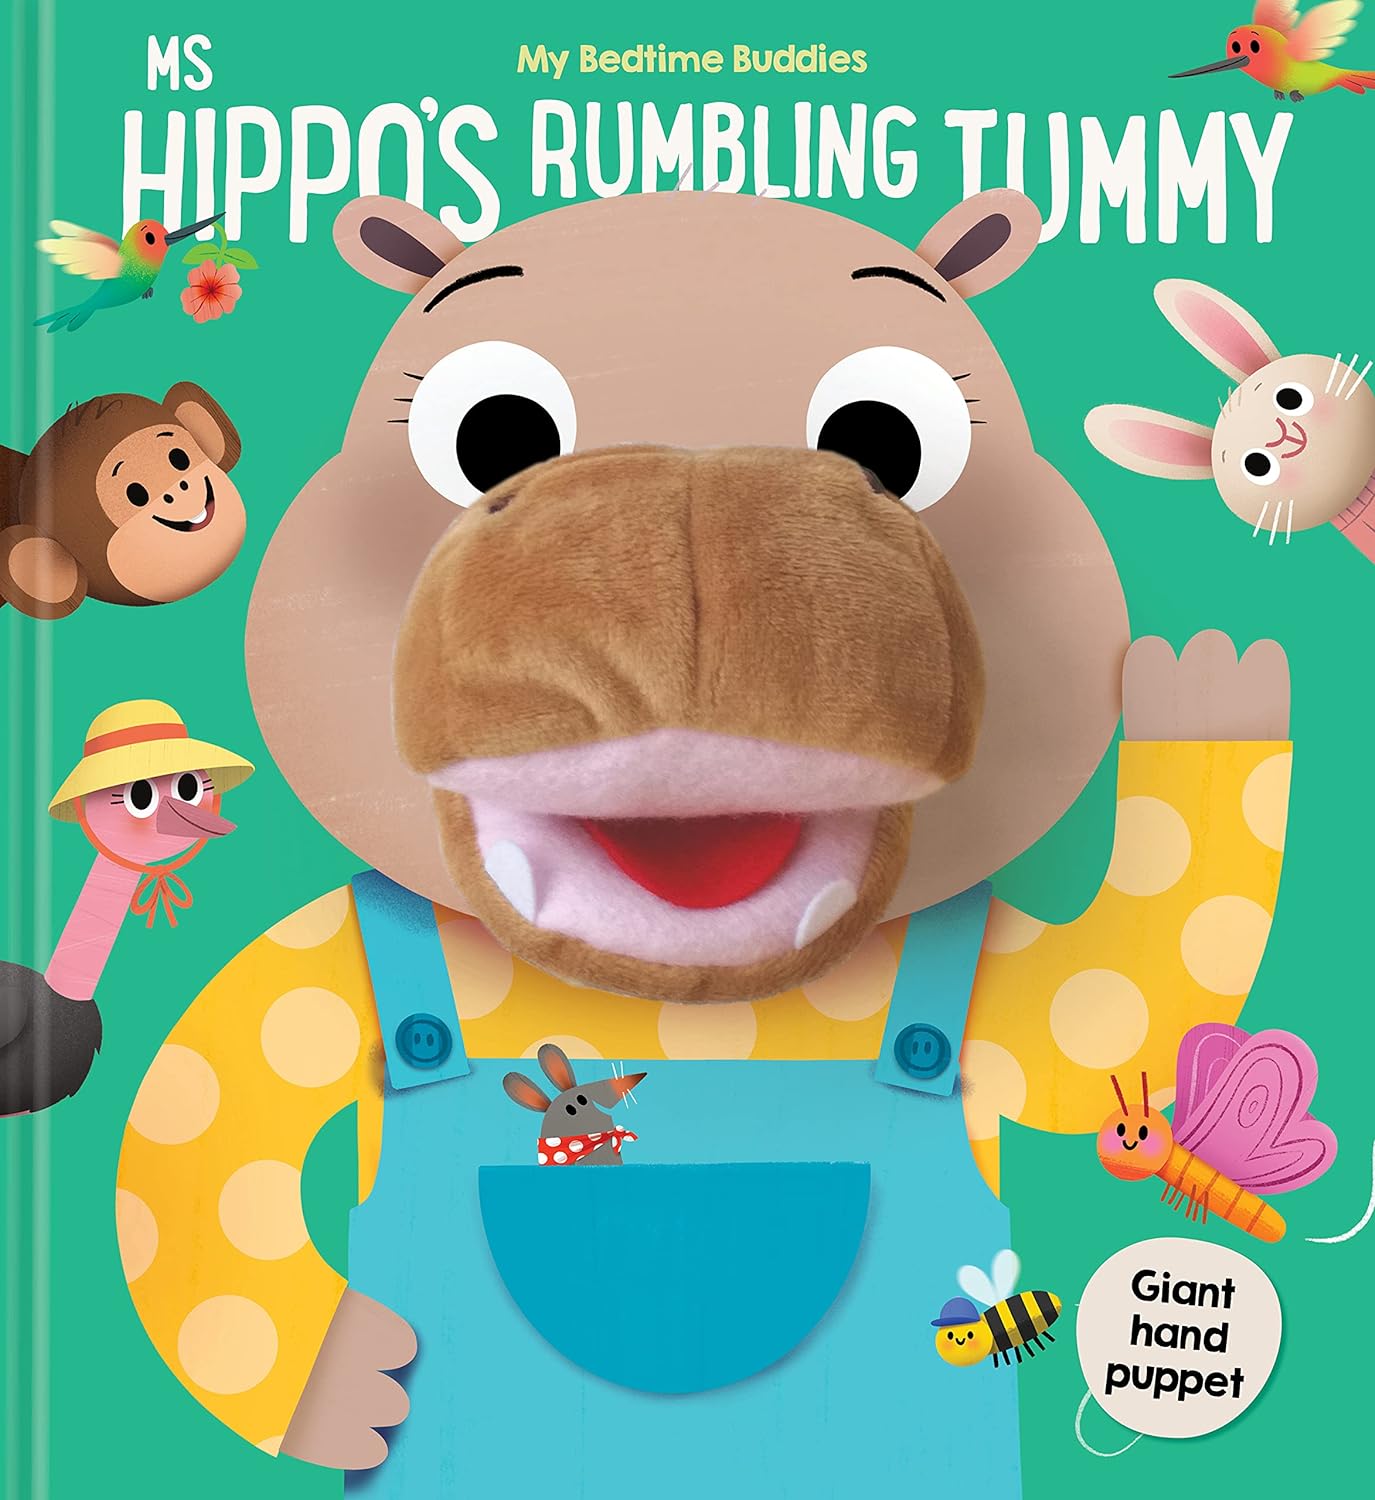 My Bedtime Buddies: Ms Hippo's Rumbling Tummy - Board Book